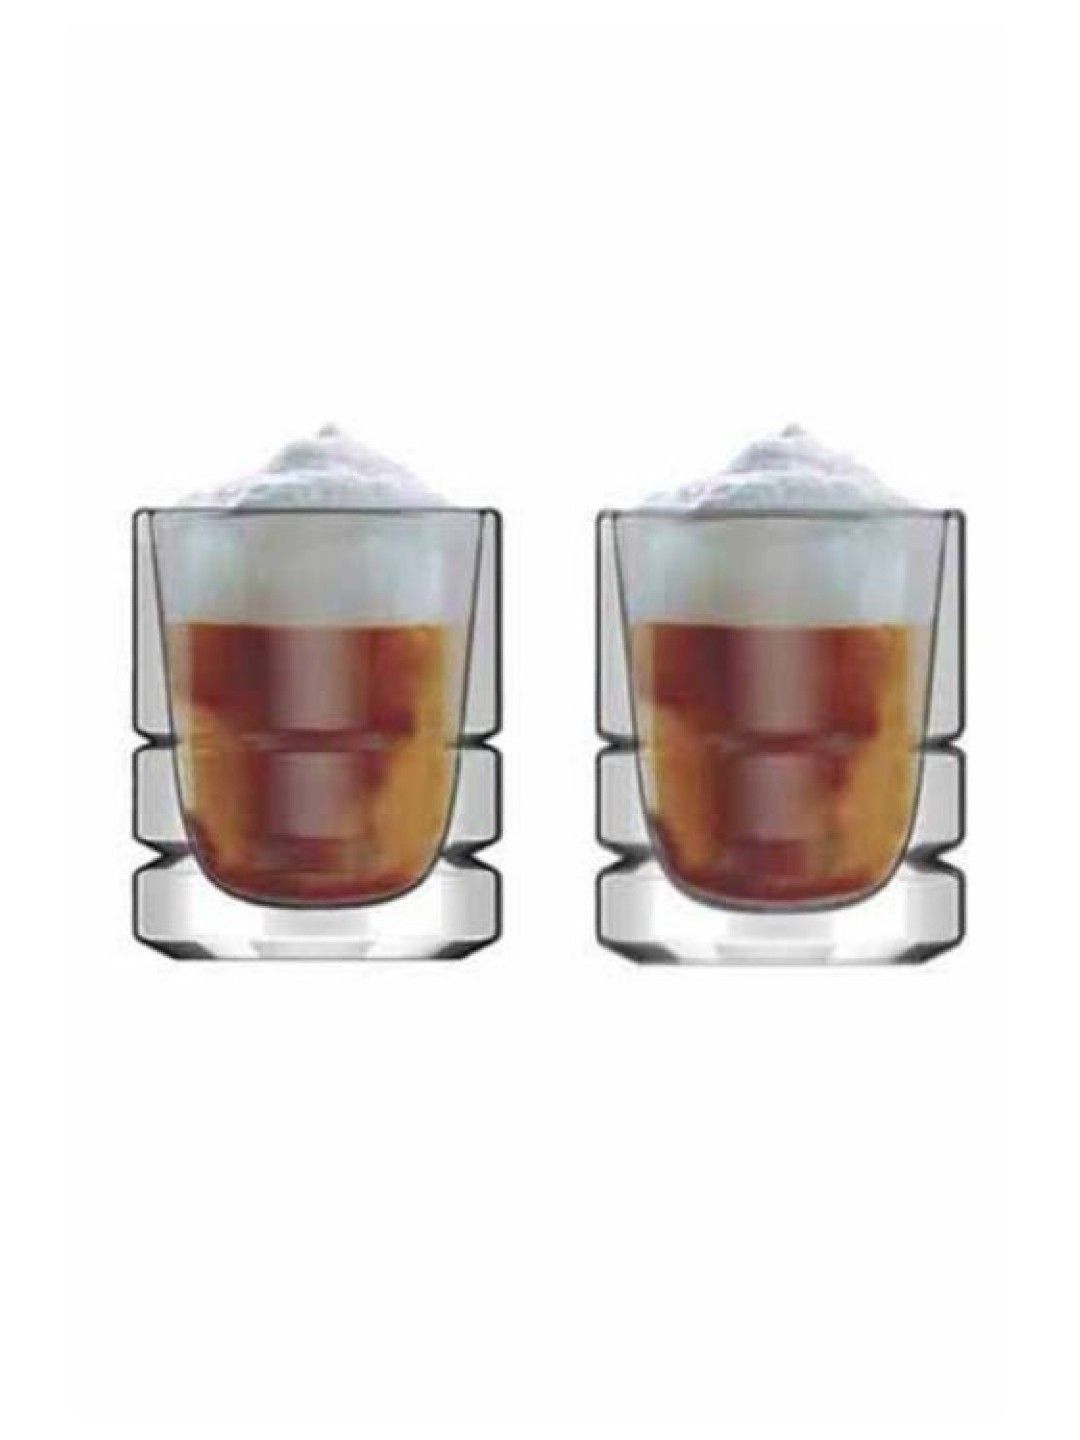 Sunbeams Lifestyle Crysalis Double Wall Glass Espresso Coffee Cup 80ml (Set of 2) (No Color- Image 1)